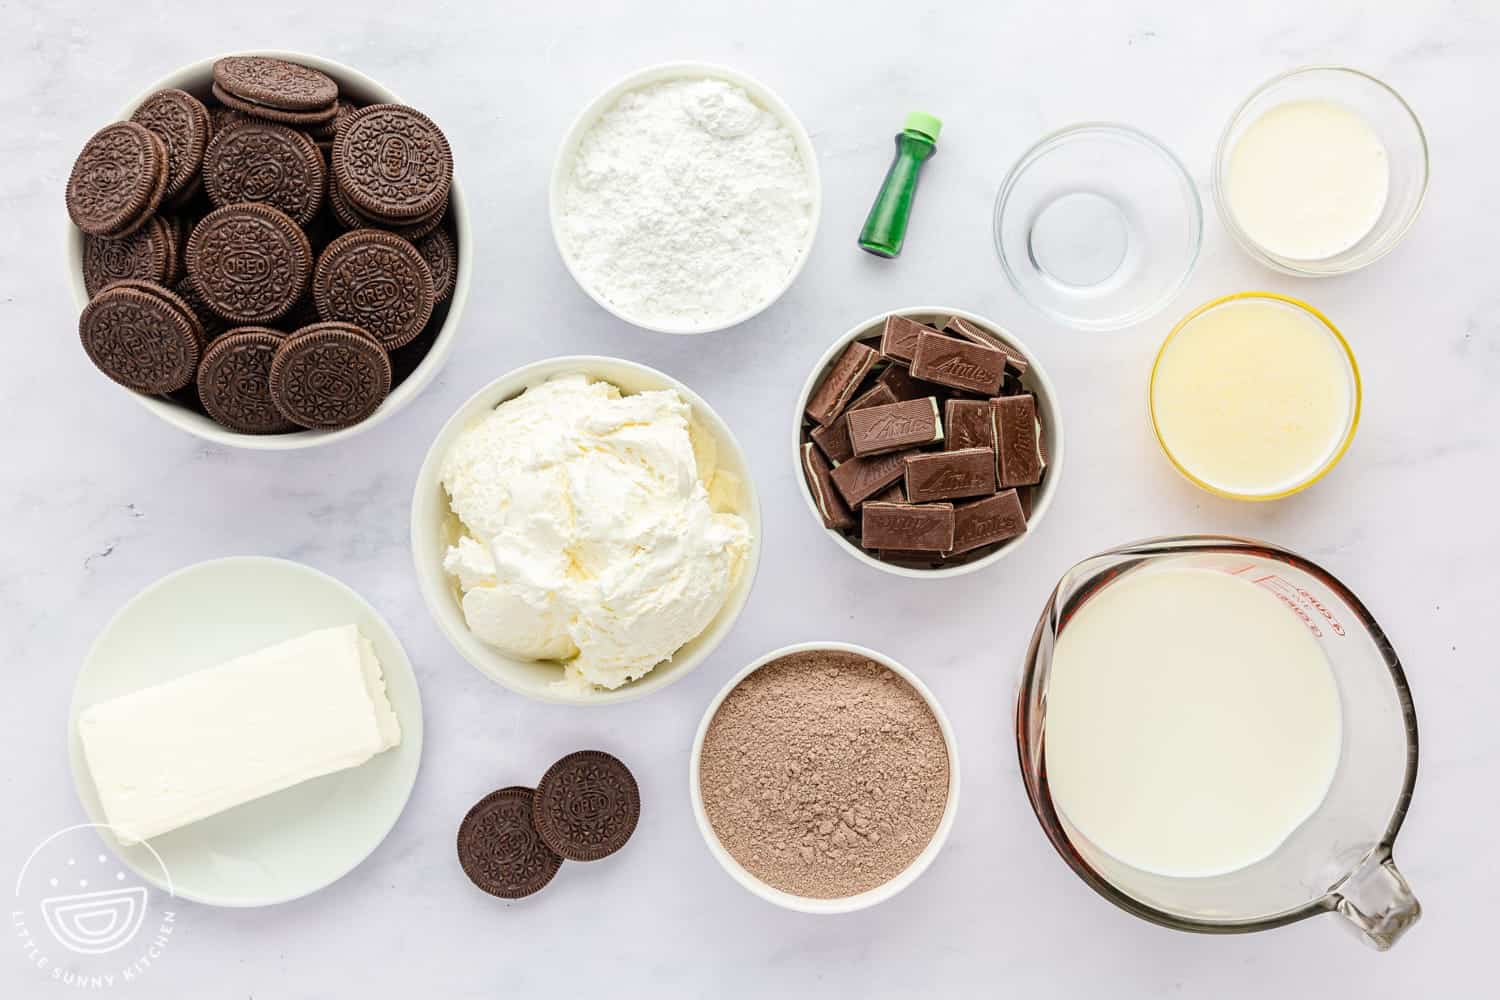 The ingredients needed to make no bake chocolate lasagna recipe with mint